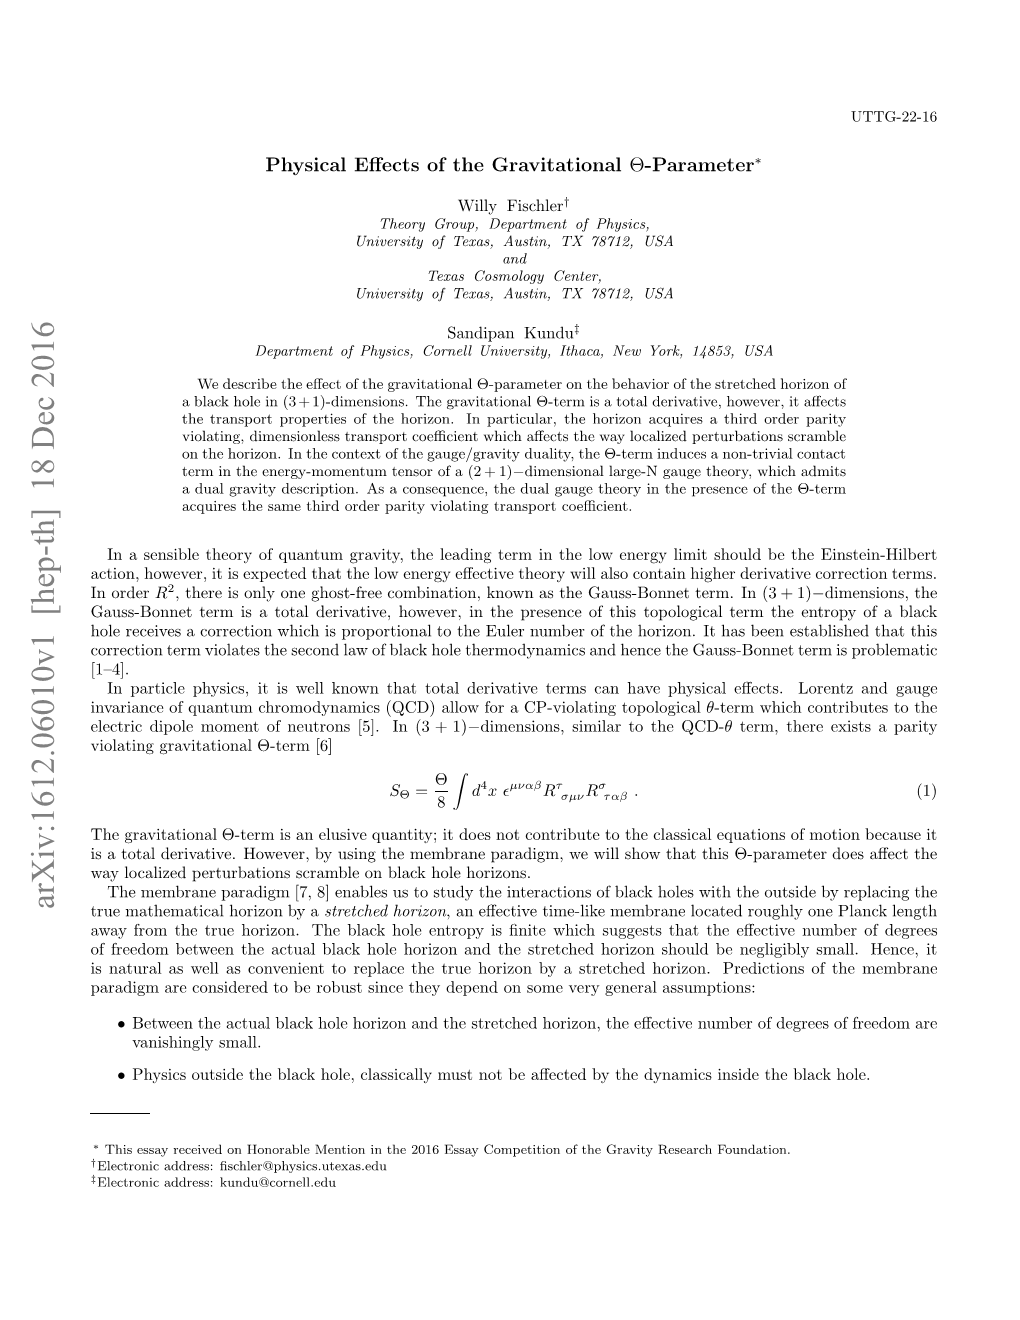 Physical Effects of the Gravitational $\Theta $-Parameter